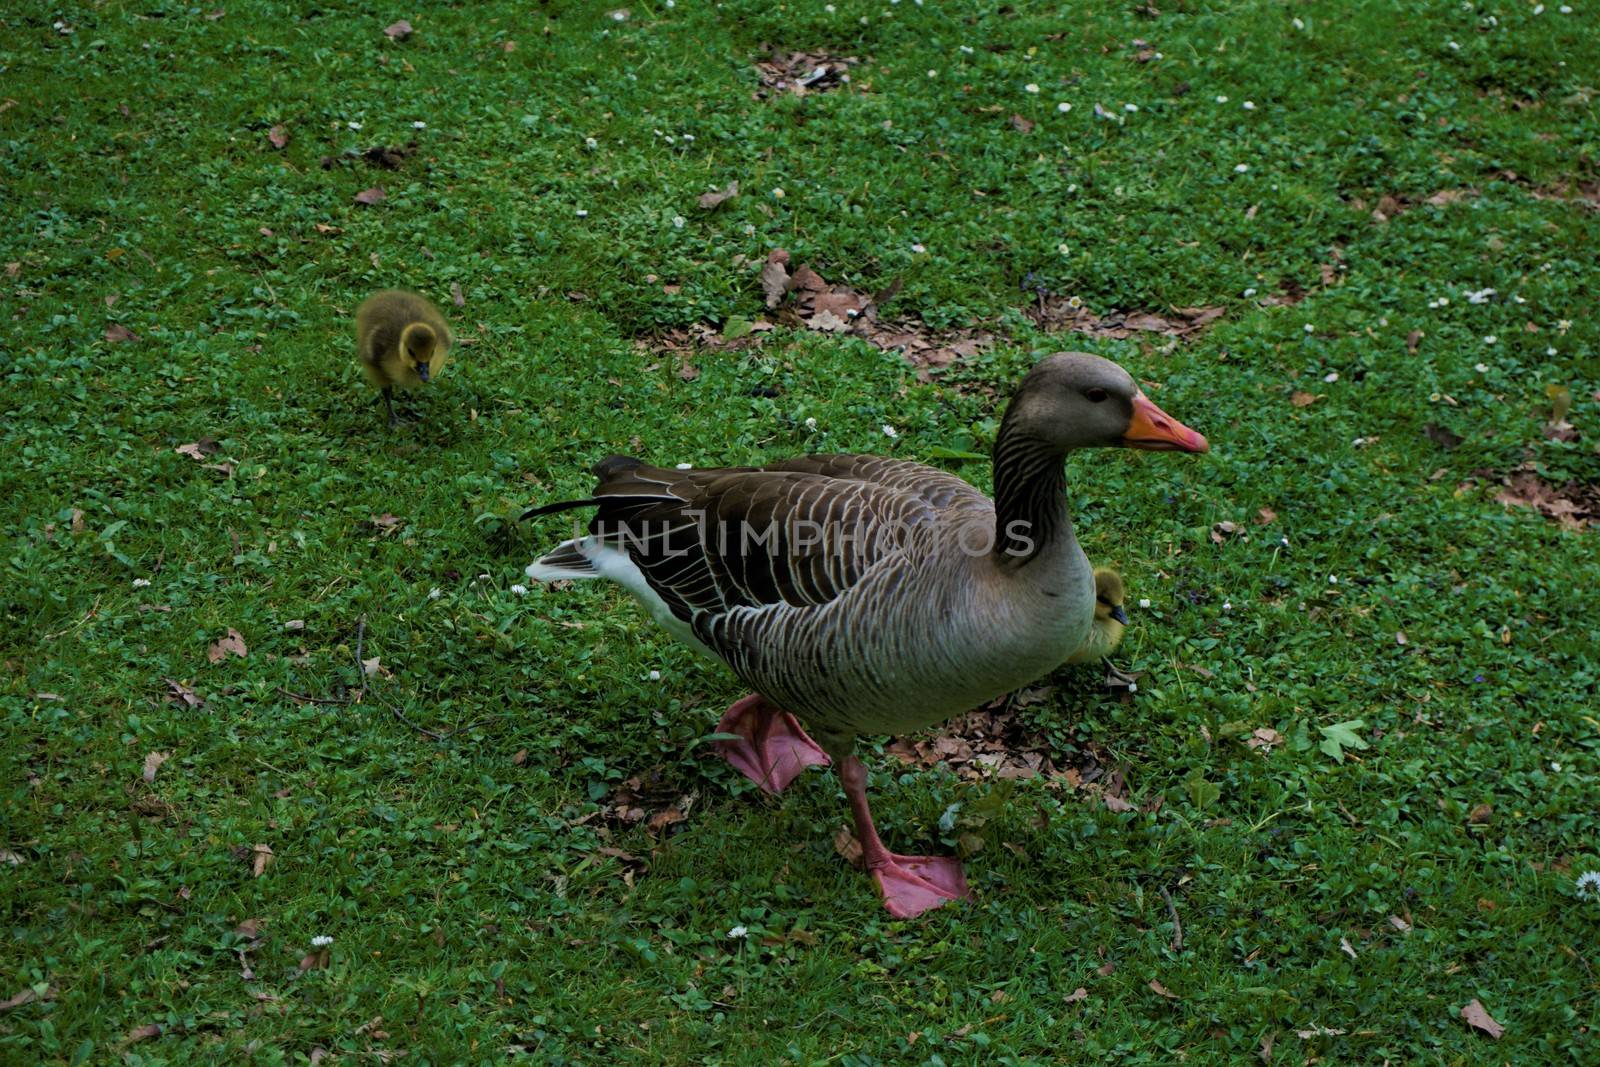 Greylag goose with a biddy on a meadow in Munich